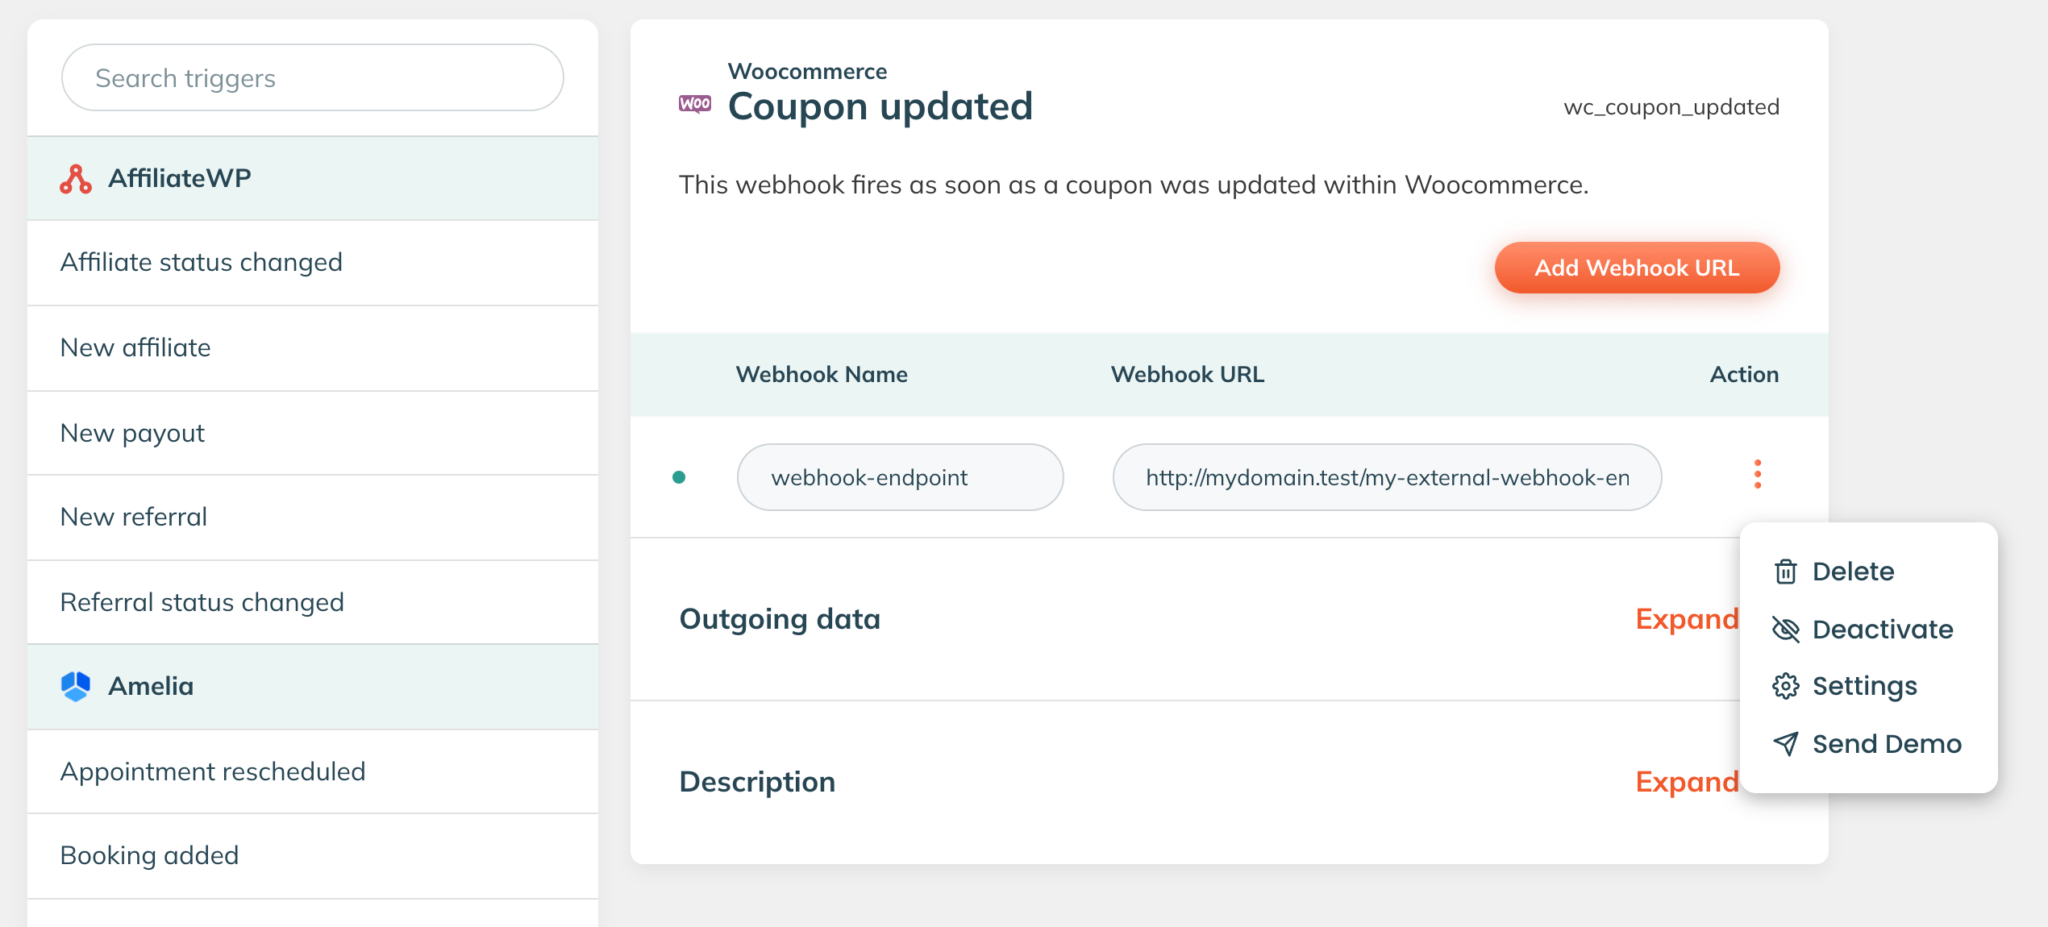 The WP Webhooks screen of the Appointment rescheduled trigger